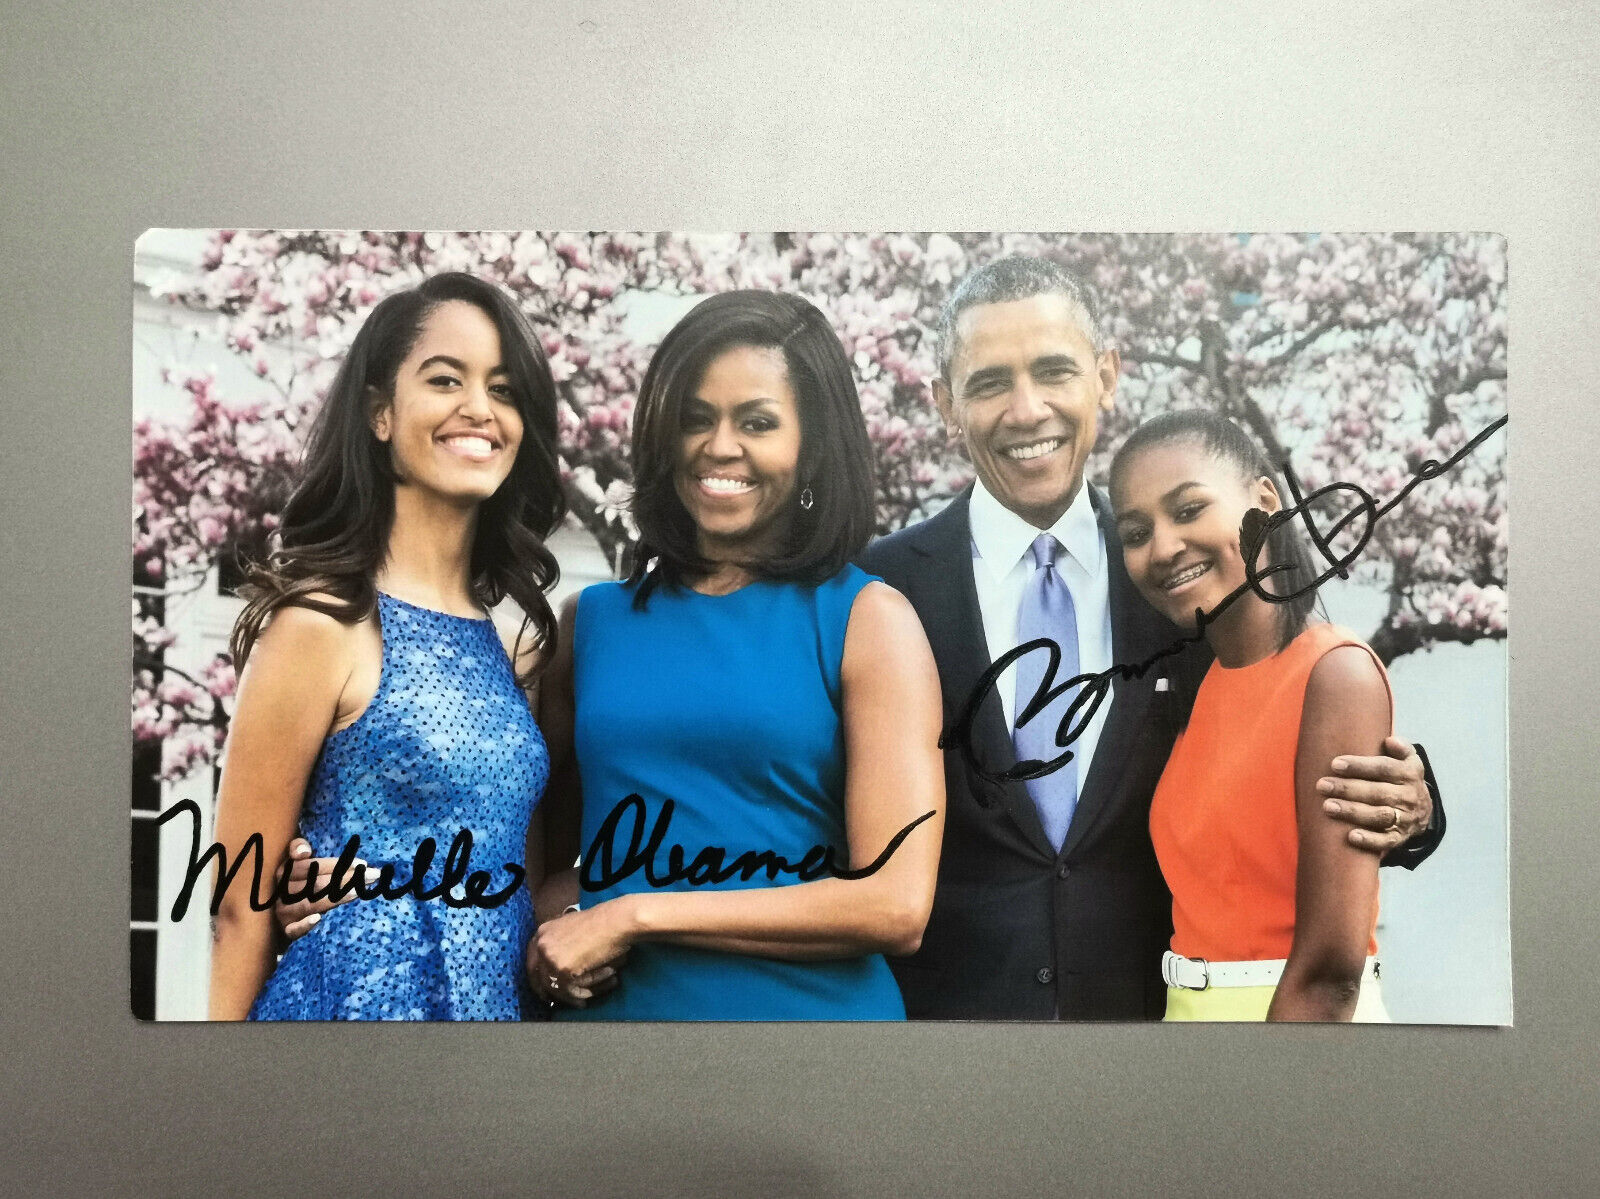 Postcard signed by Barack and Michelle Obama.